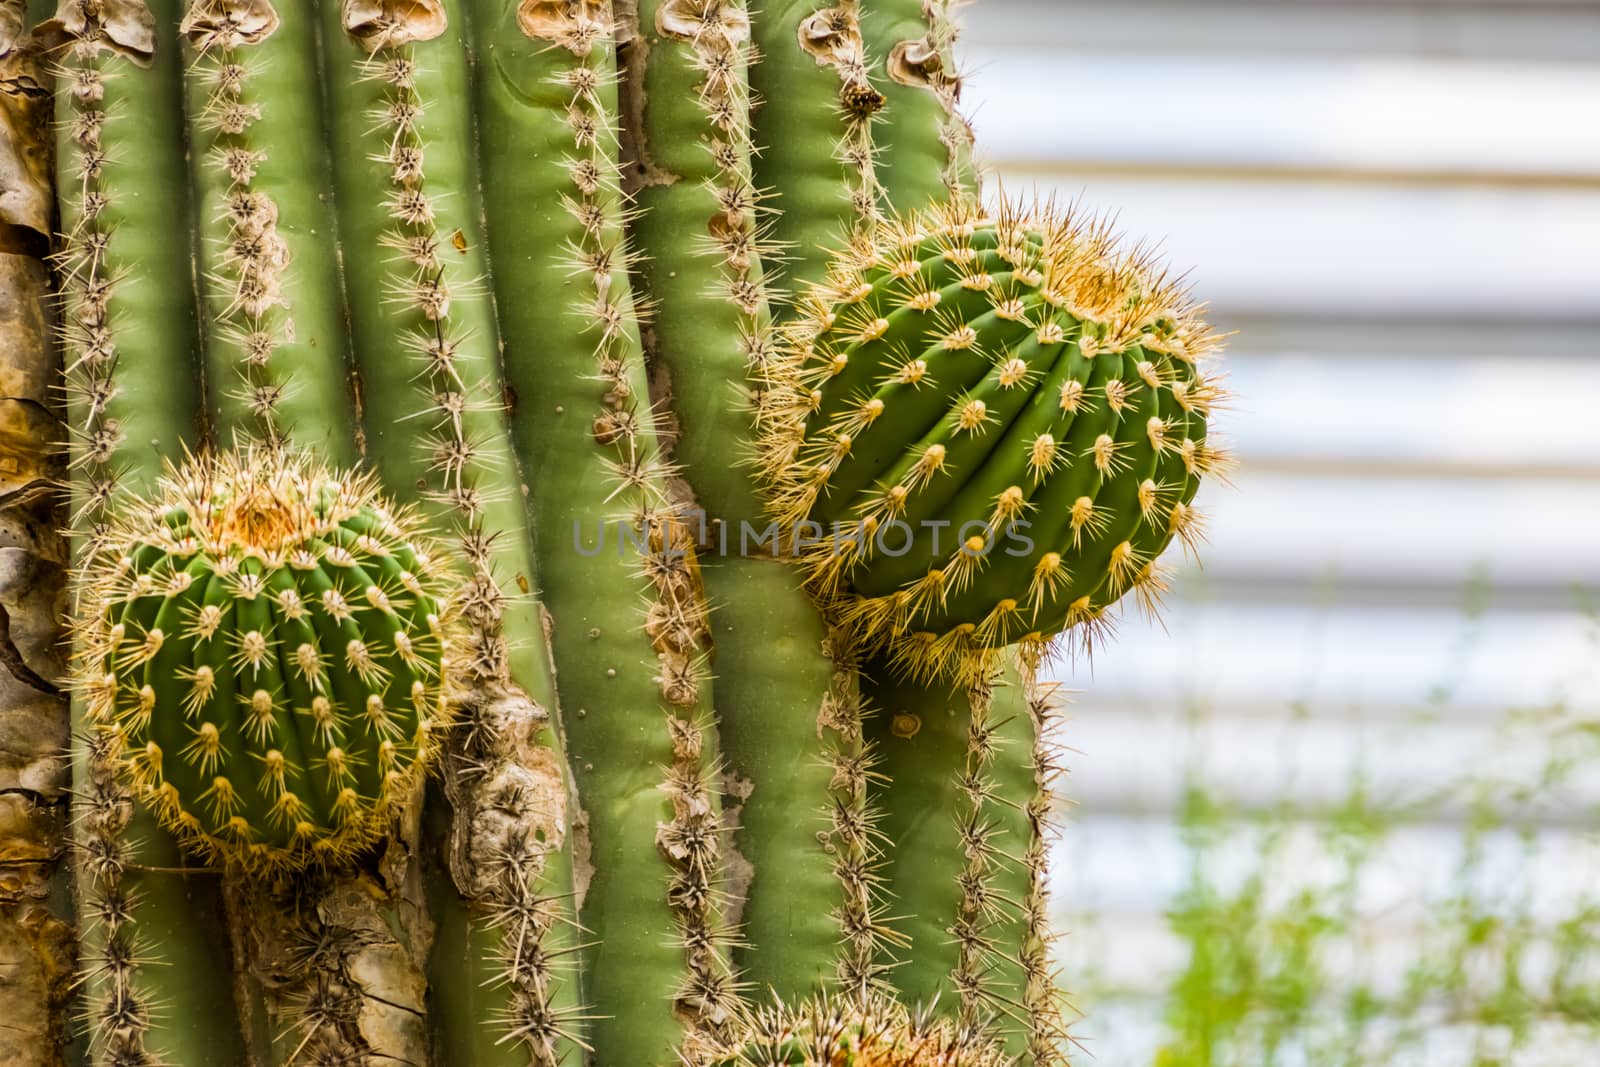 closeup of a big cactus branching out, Growth process of a cactus tree, tropical nature background